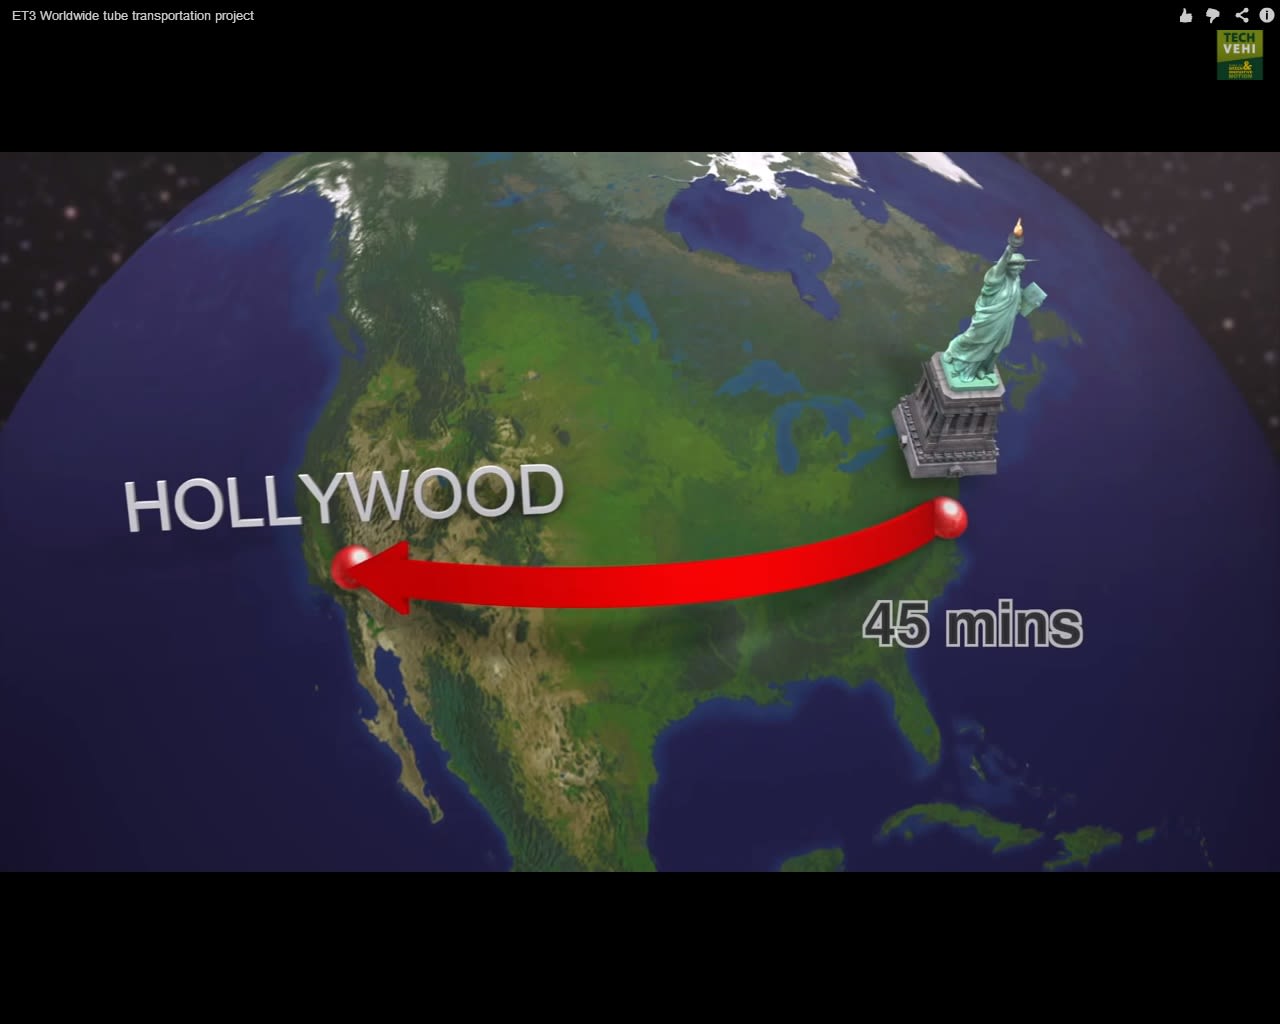 As crazy as it sounds, if moving at their projected speeds the capsules could travel from New York to Southern California -- a journey of some 3,000 miles -- in about 45 minutes. <a href="https://twitter.com/elonmusk/status/356776740409974785" target="_blank" target="_blank">Musk says he will publish an alpha, or early design</a>, of the prototype system next month.